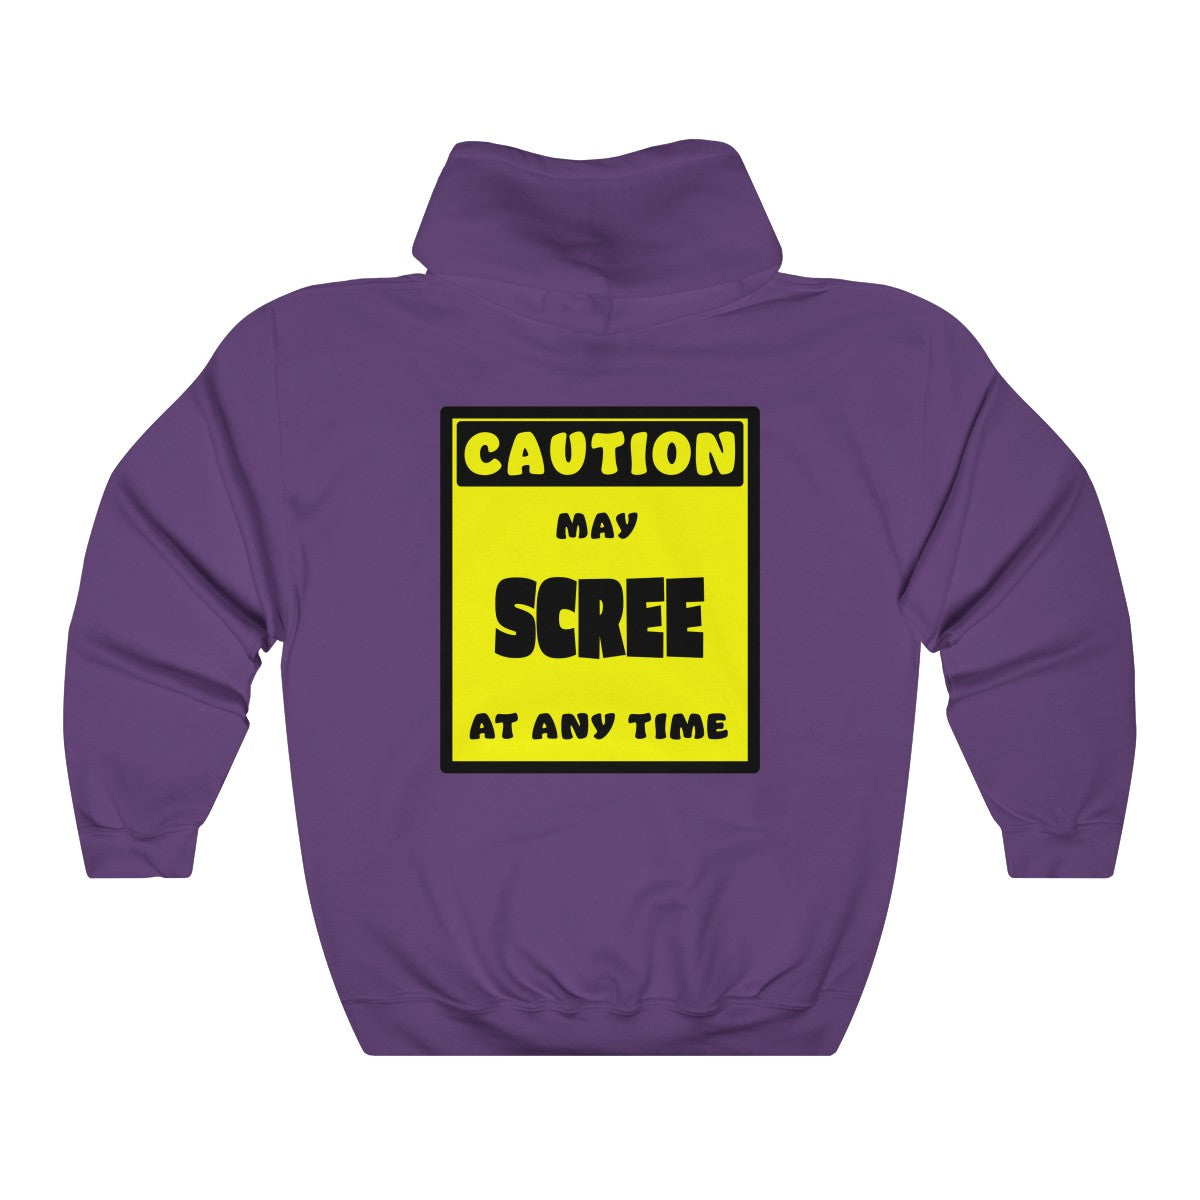 CAUTION! May SCREE at any time! - Hoodie Hoodie AFLT-Whootorca Purple S 